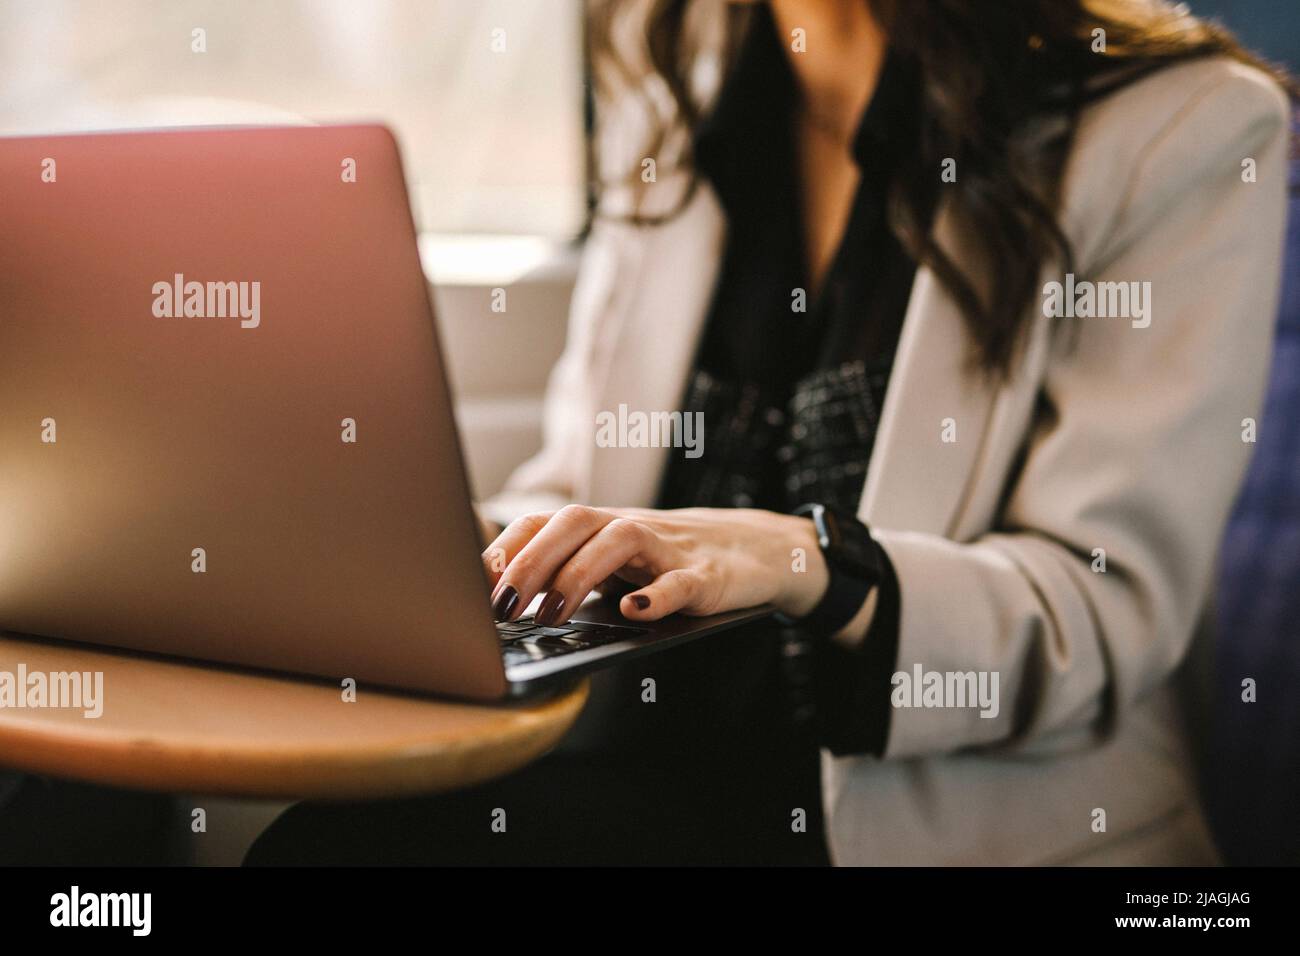 Midsection of businesswoman using laptop while commuting in train Stock Photo